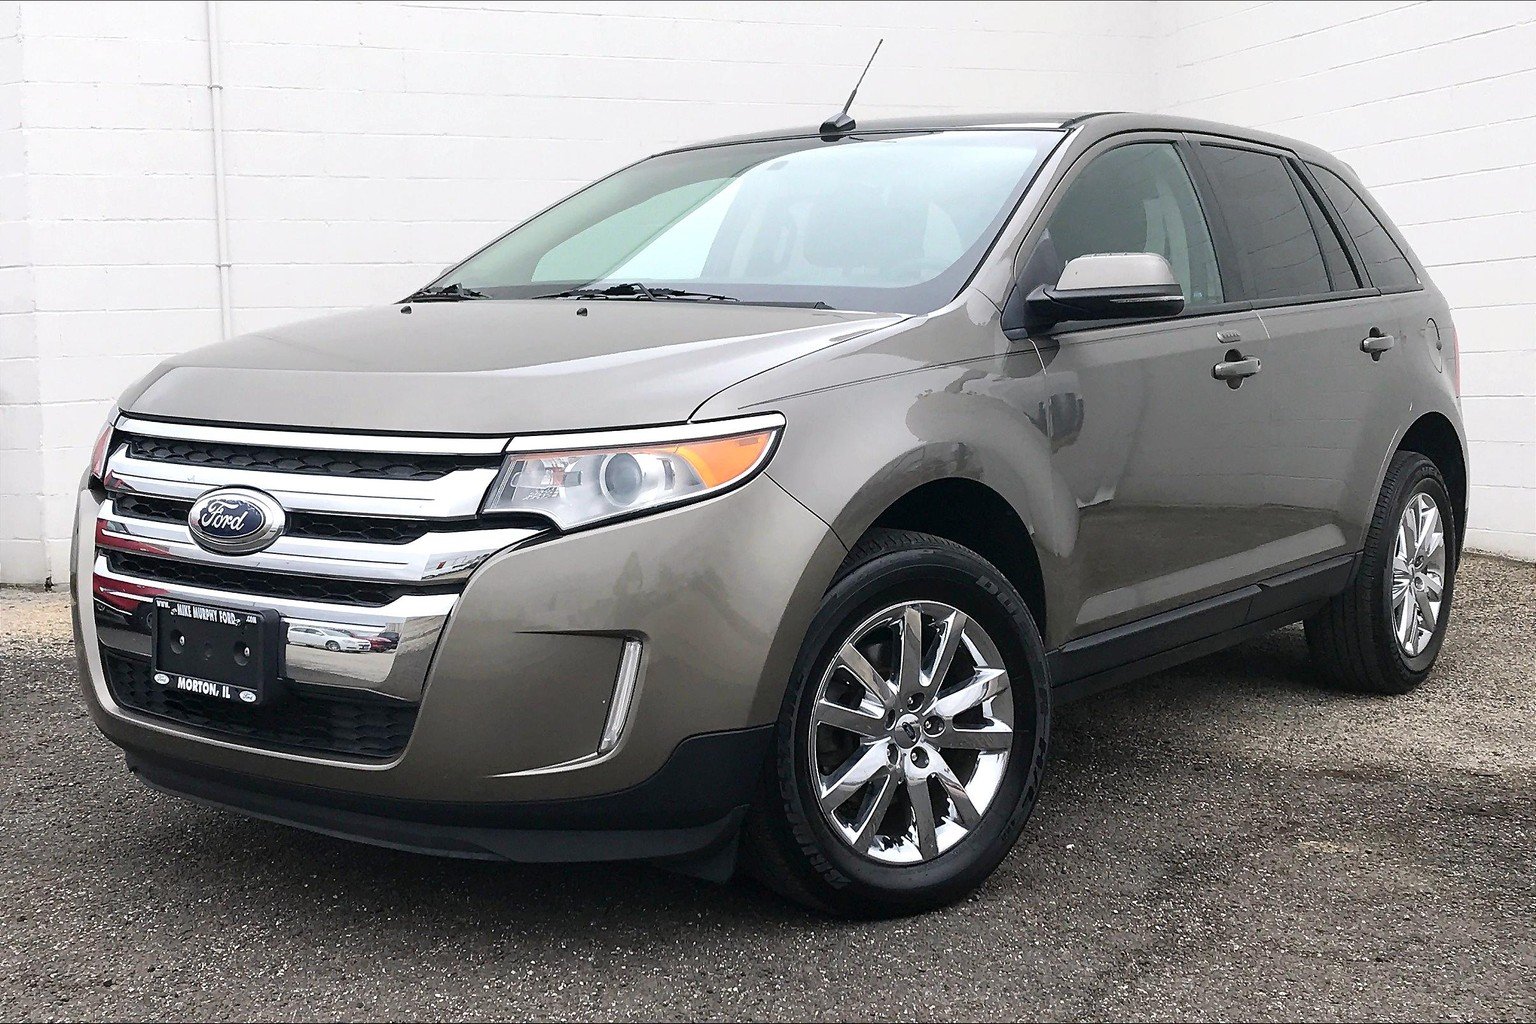 Pre Owned 2013 Ford Edge 4dr SEL FWD 4D Sport Utility in Morton B36552 